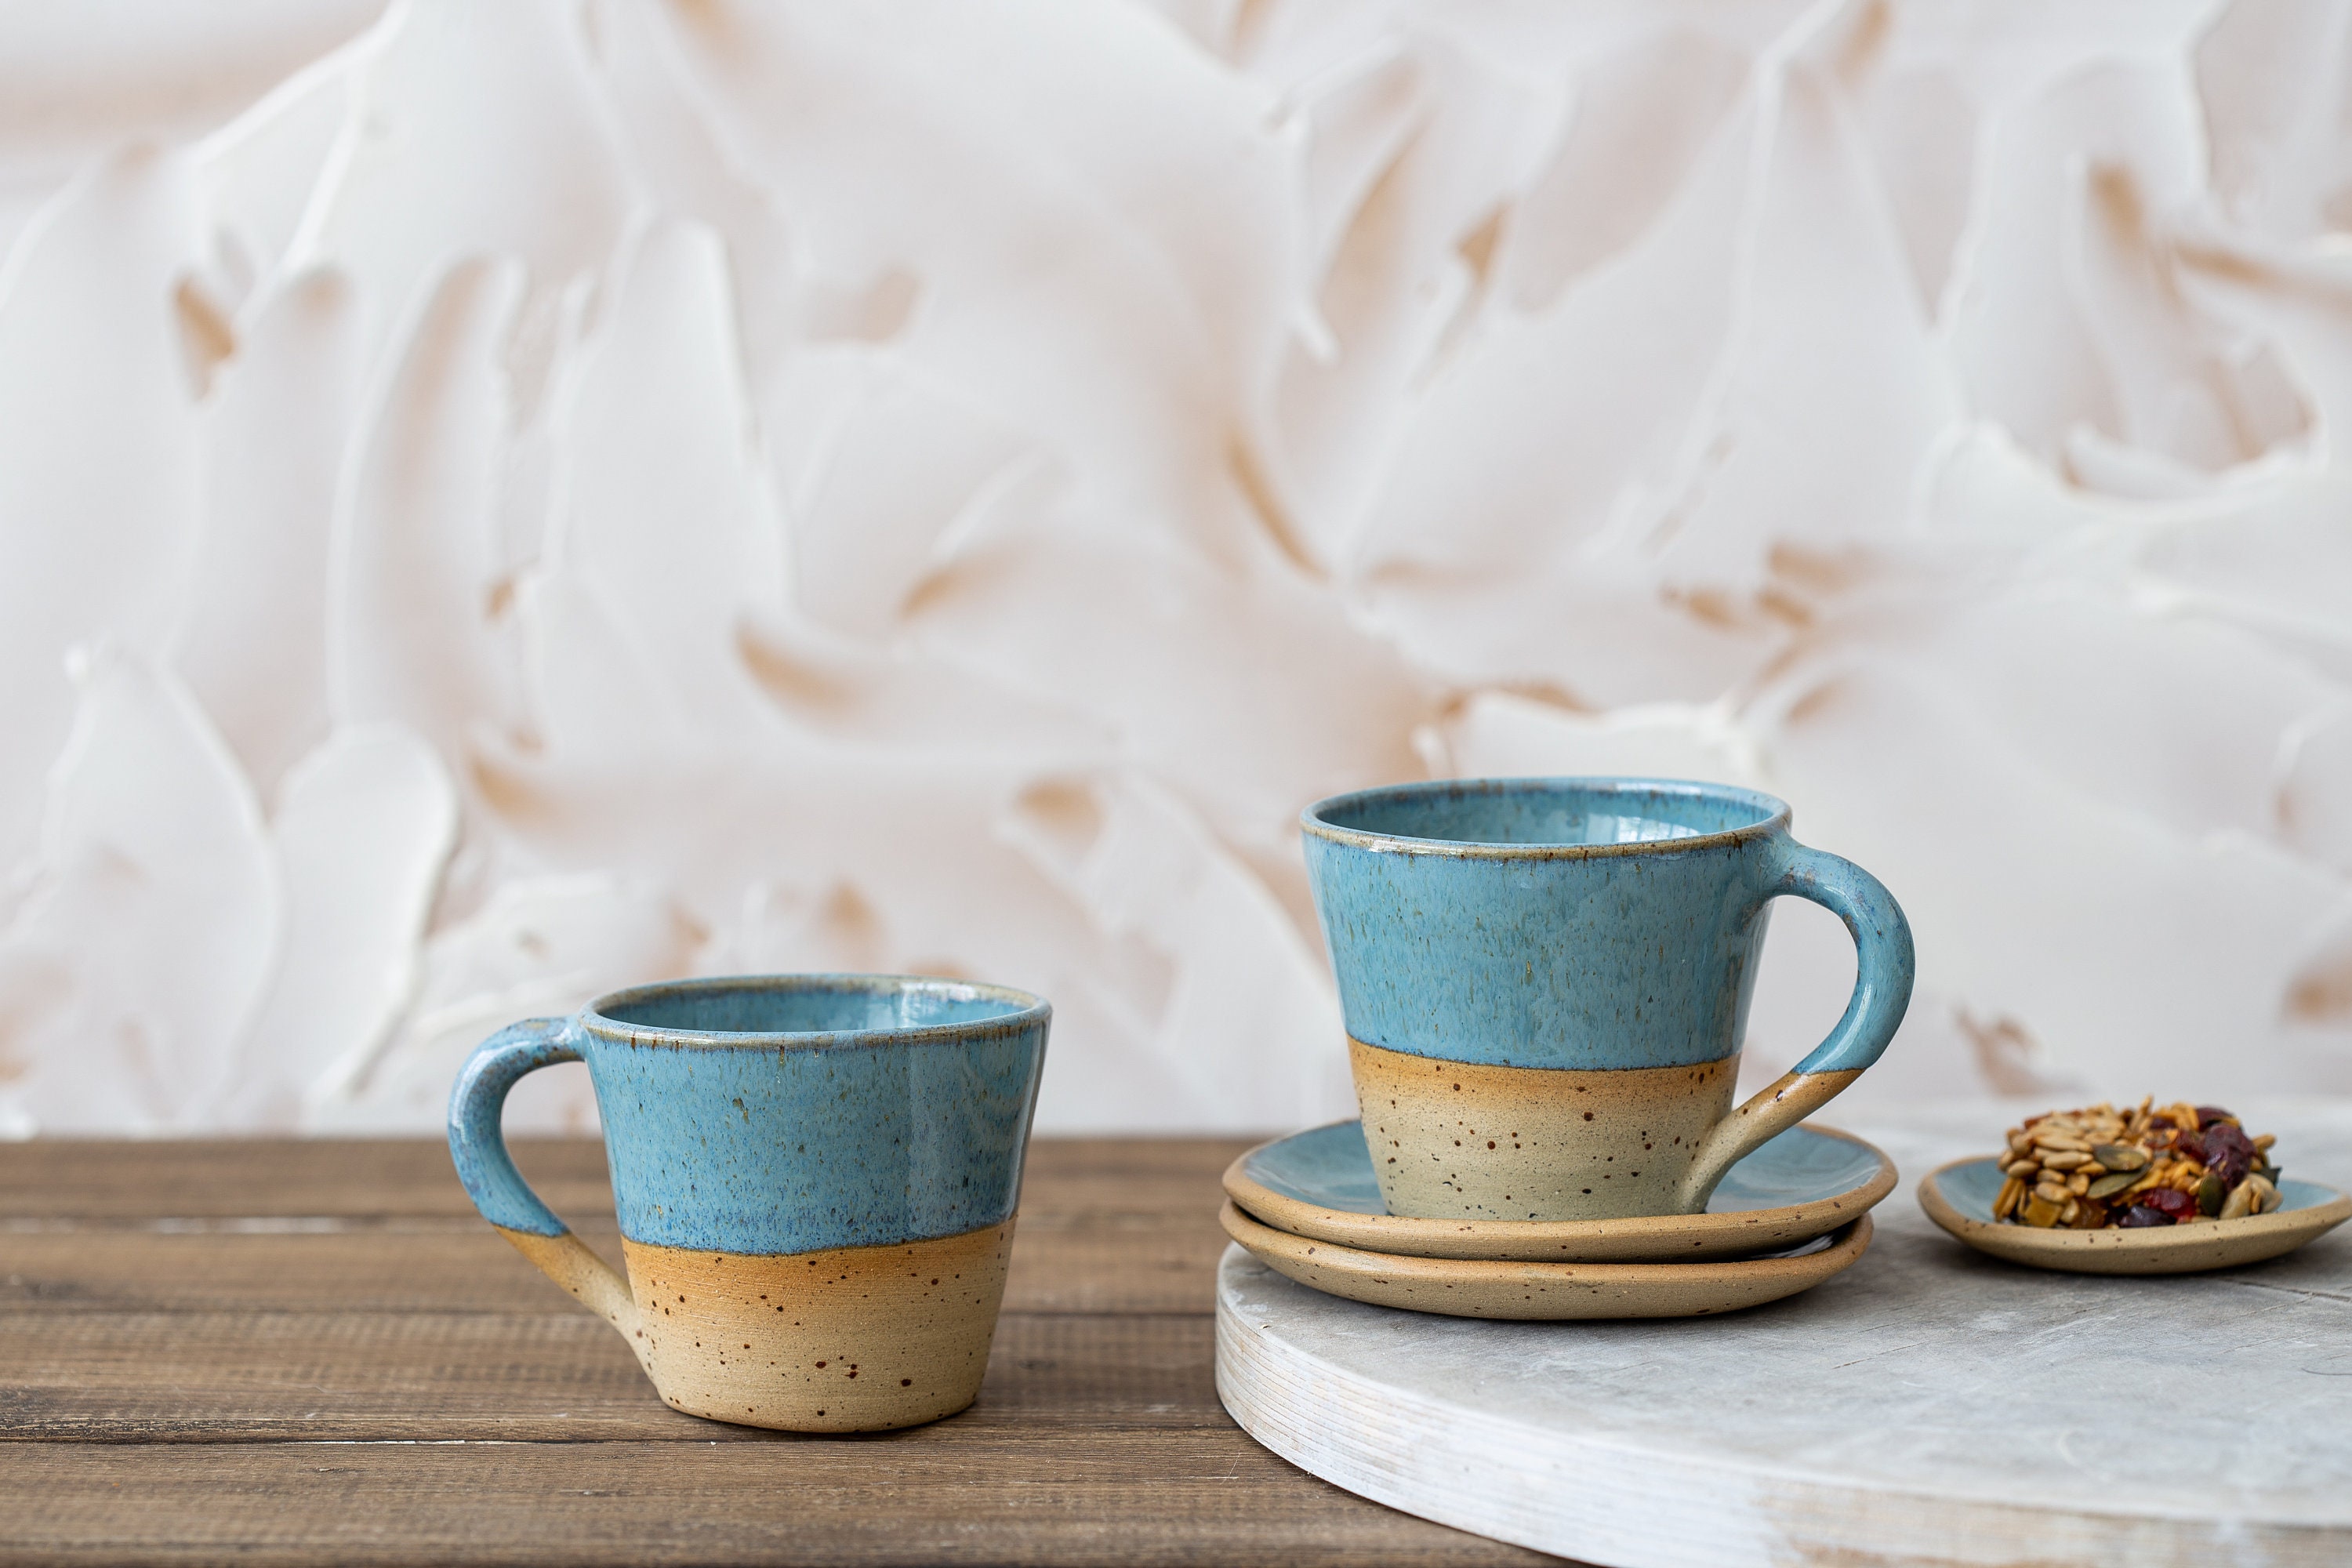  Green and Beige Pottery Mug - Handmade Coffee Cup - Espresso Cup  - Pottery Teacup - Birthday gift - Coffee Sets - Cute Cups : Handmade  Products